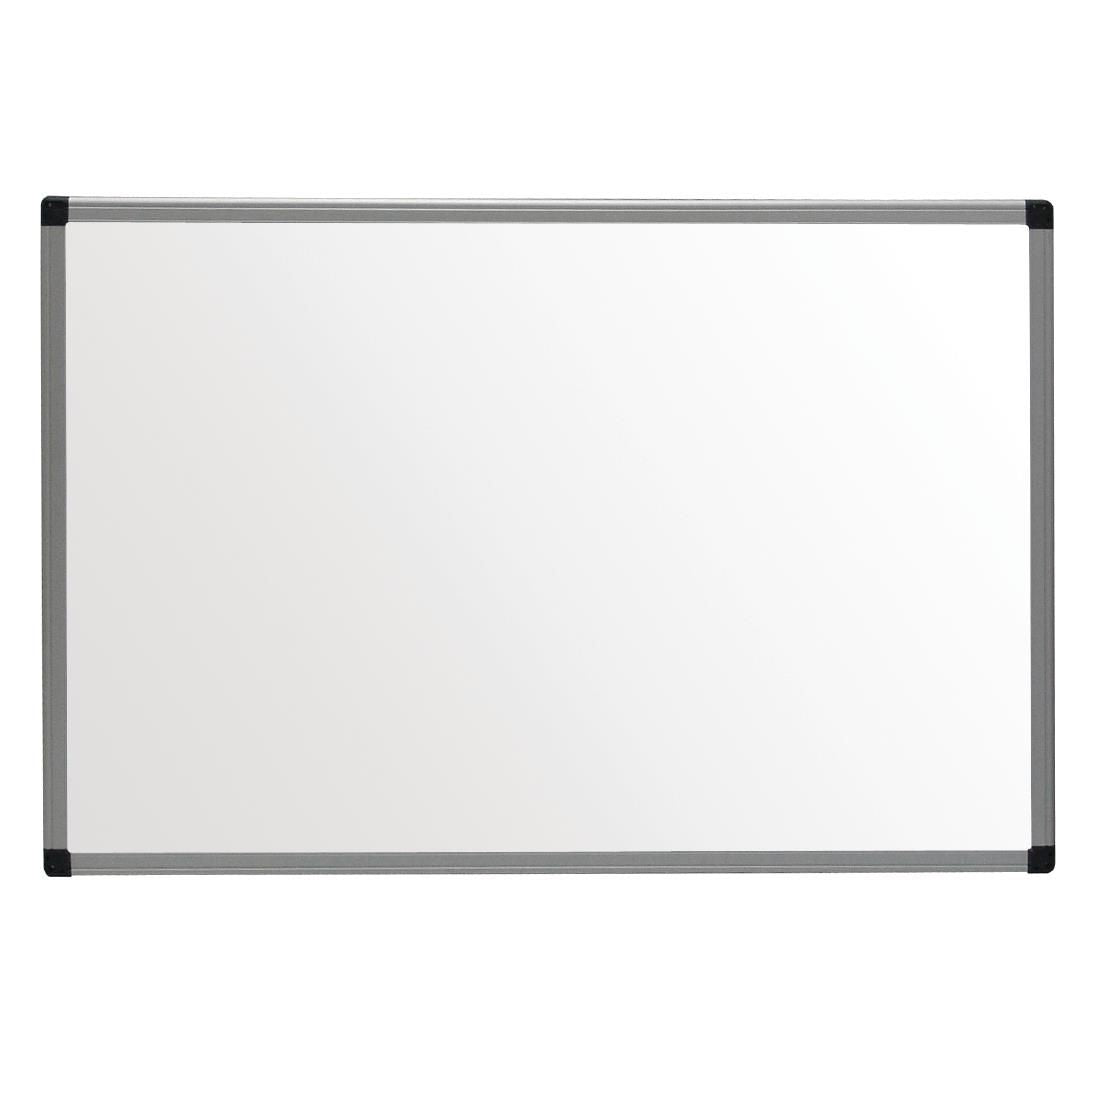 GG046 Olympia White Magnetic Board JD Catering Equipment Solutions Ltd